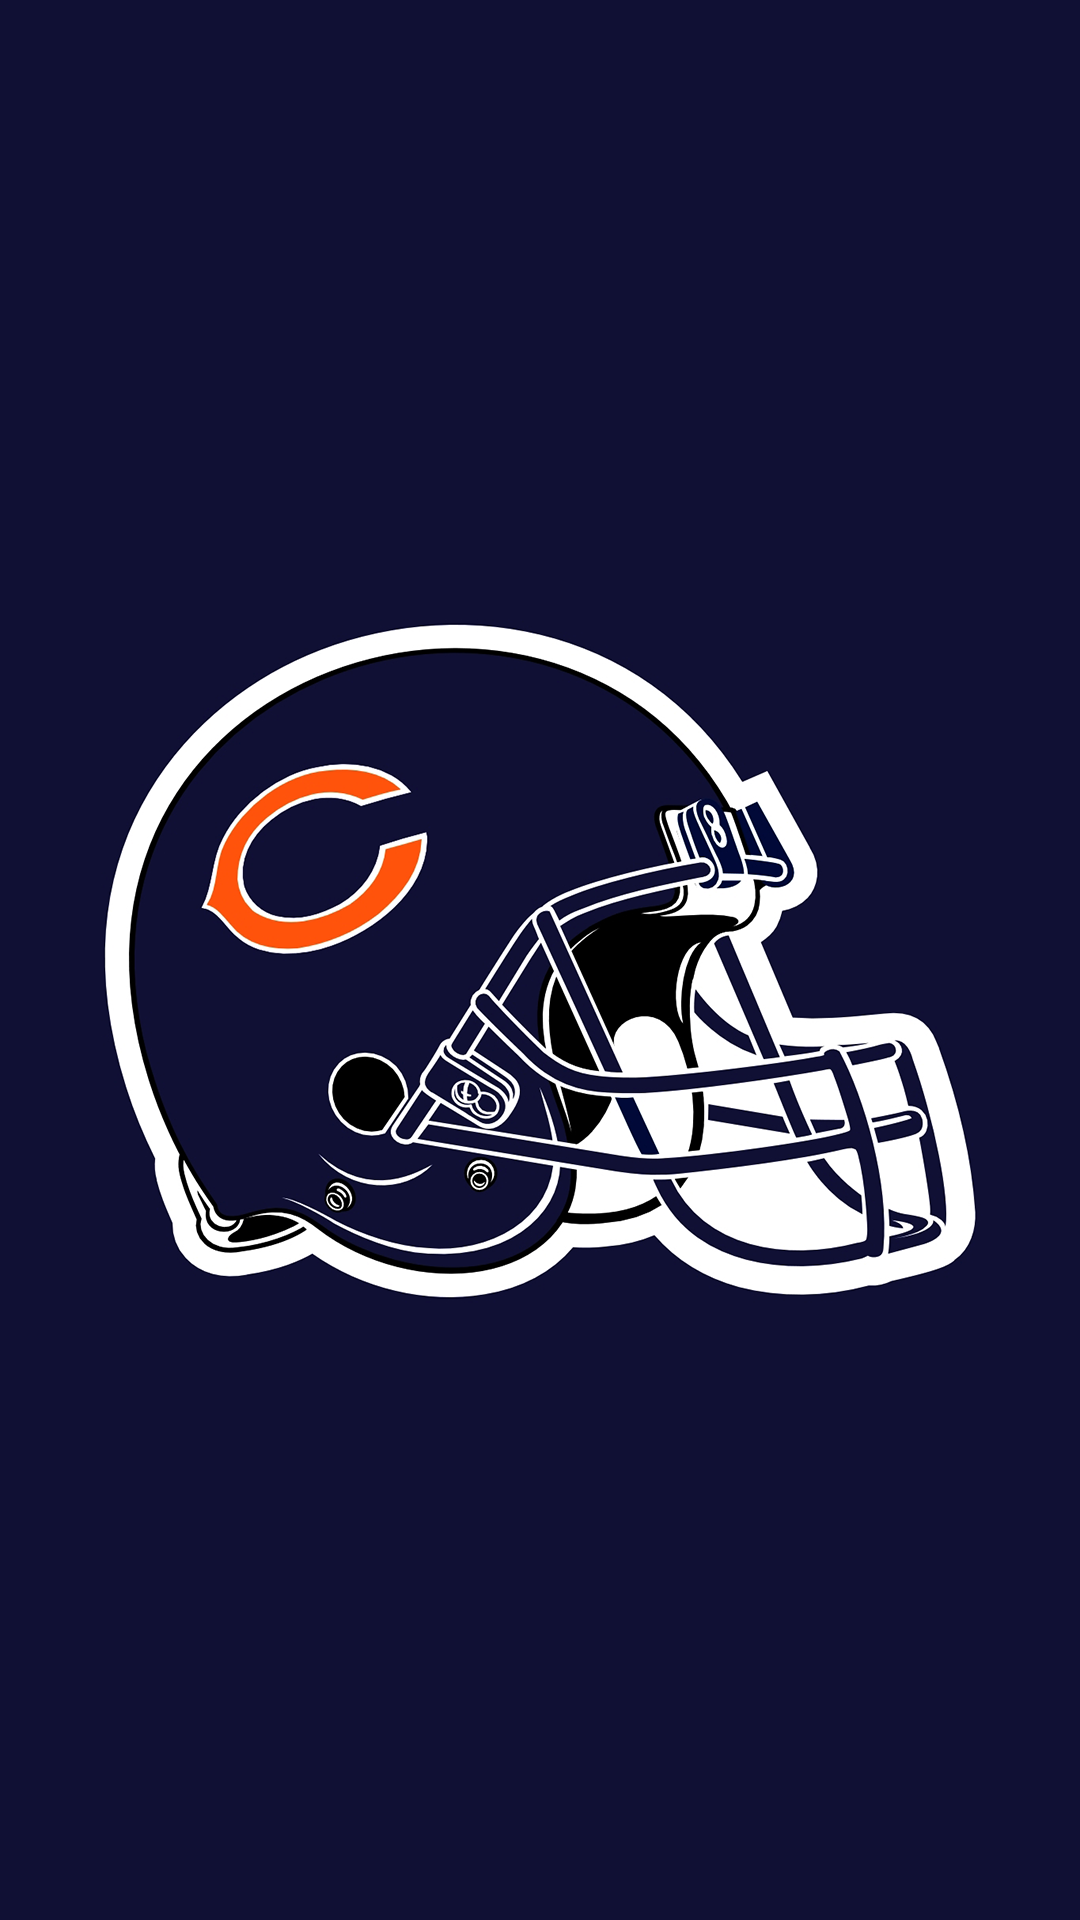 Chicago Bears wallpaper for your phone  Chicago bears wallpaper Chicago  bears Chicago bears logo